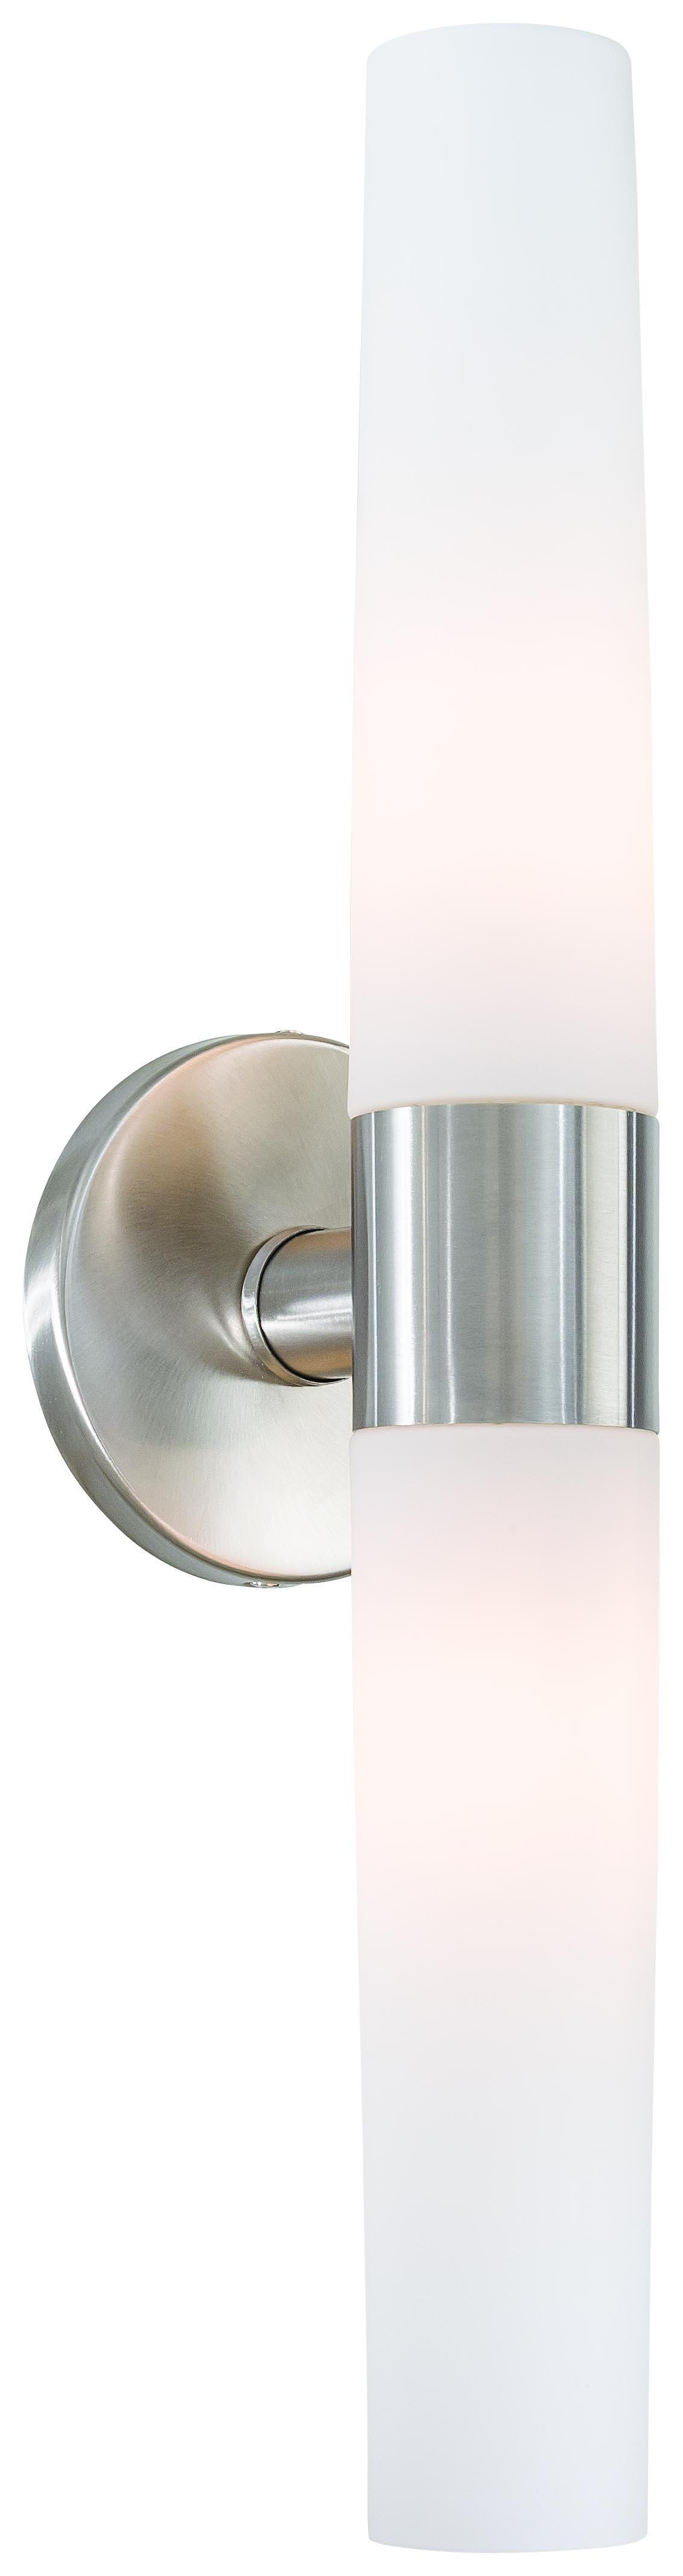 George Kovacs Saber Light Bathroom Fixture in Brushed Stainless Steel,  P5042-144 The Light Brothers